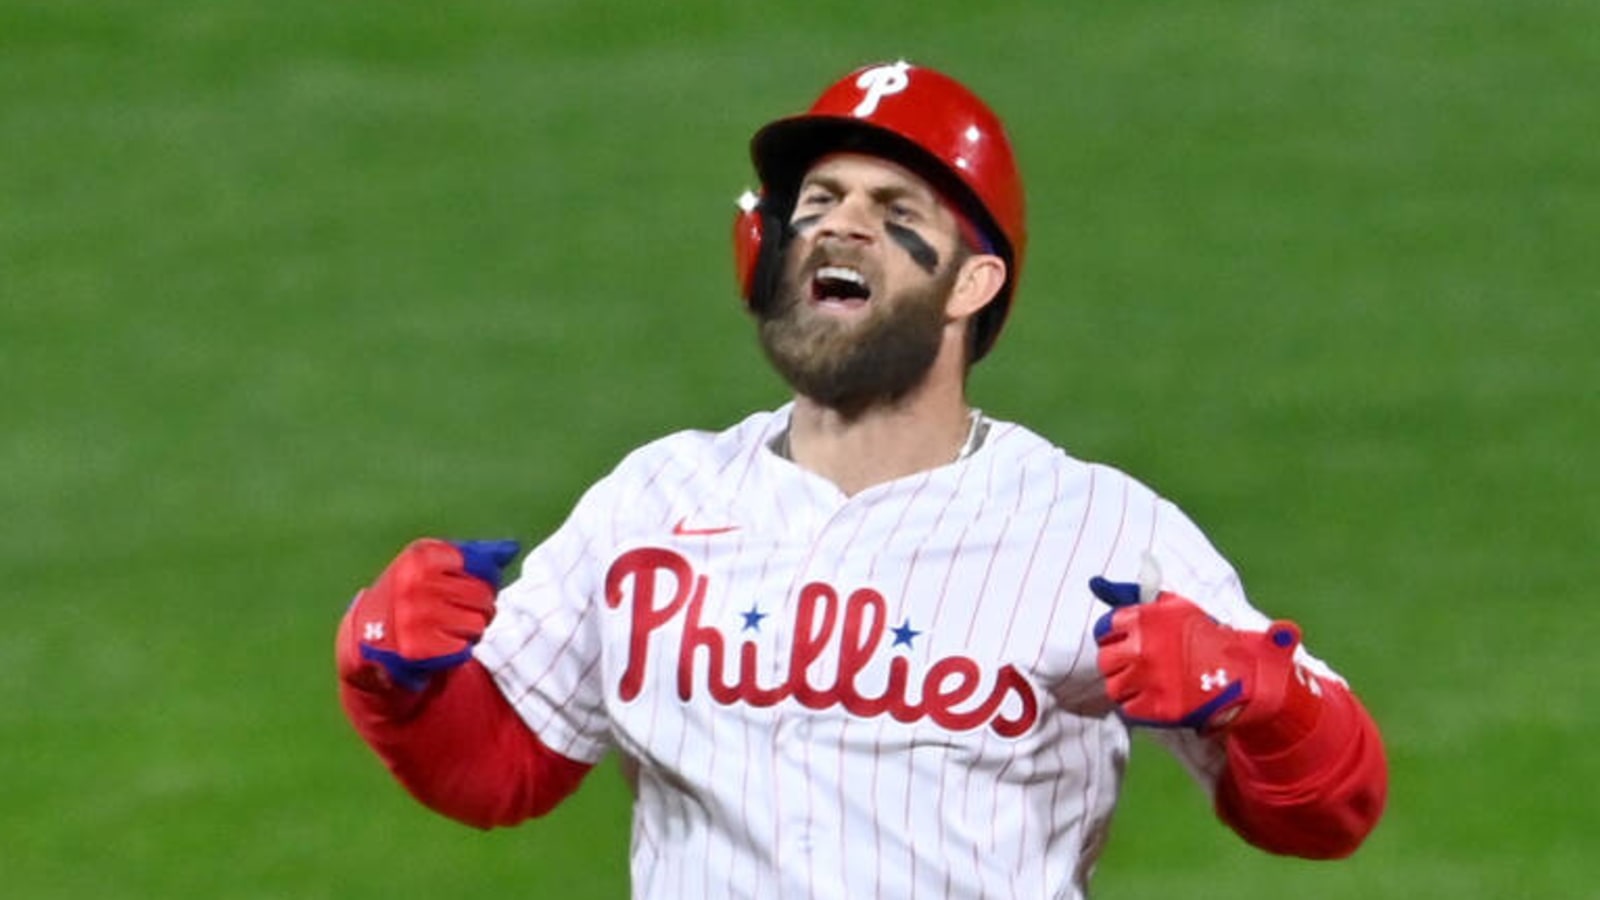 Phillies' Harper had fiery message after big hit in Game 4